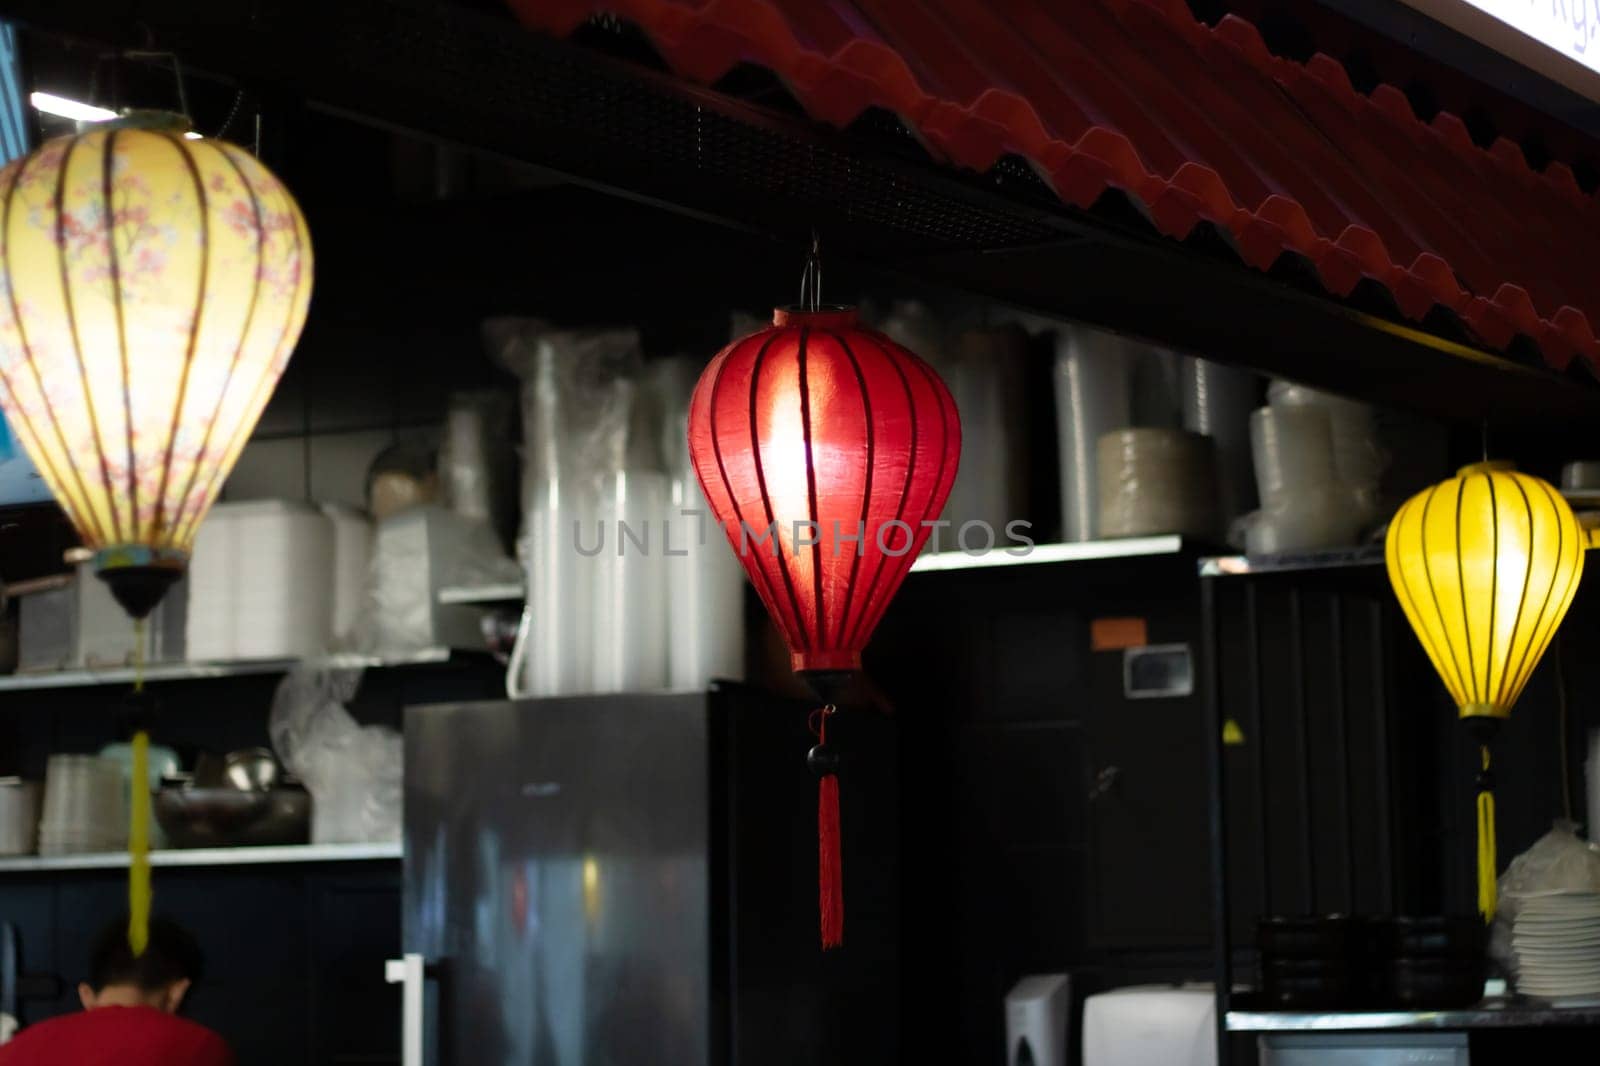 Colorful lanterns illuminate the restaurant, creating a vibrant atmosphere by Vera1703